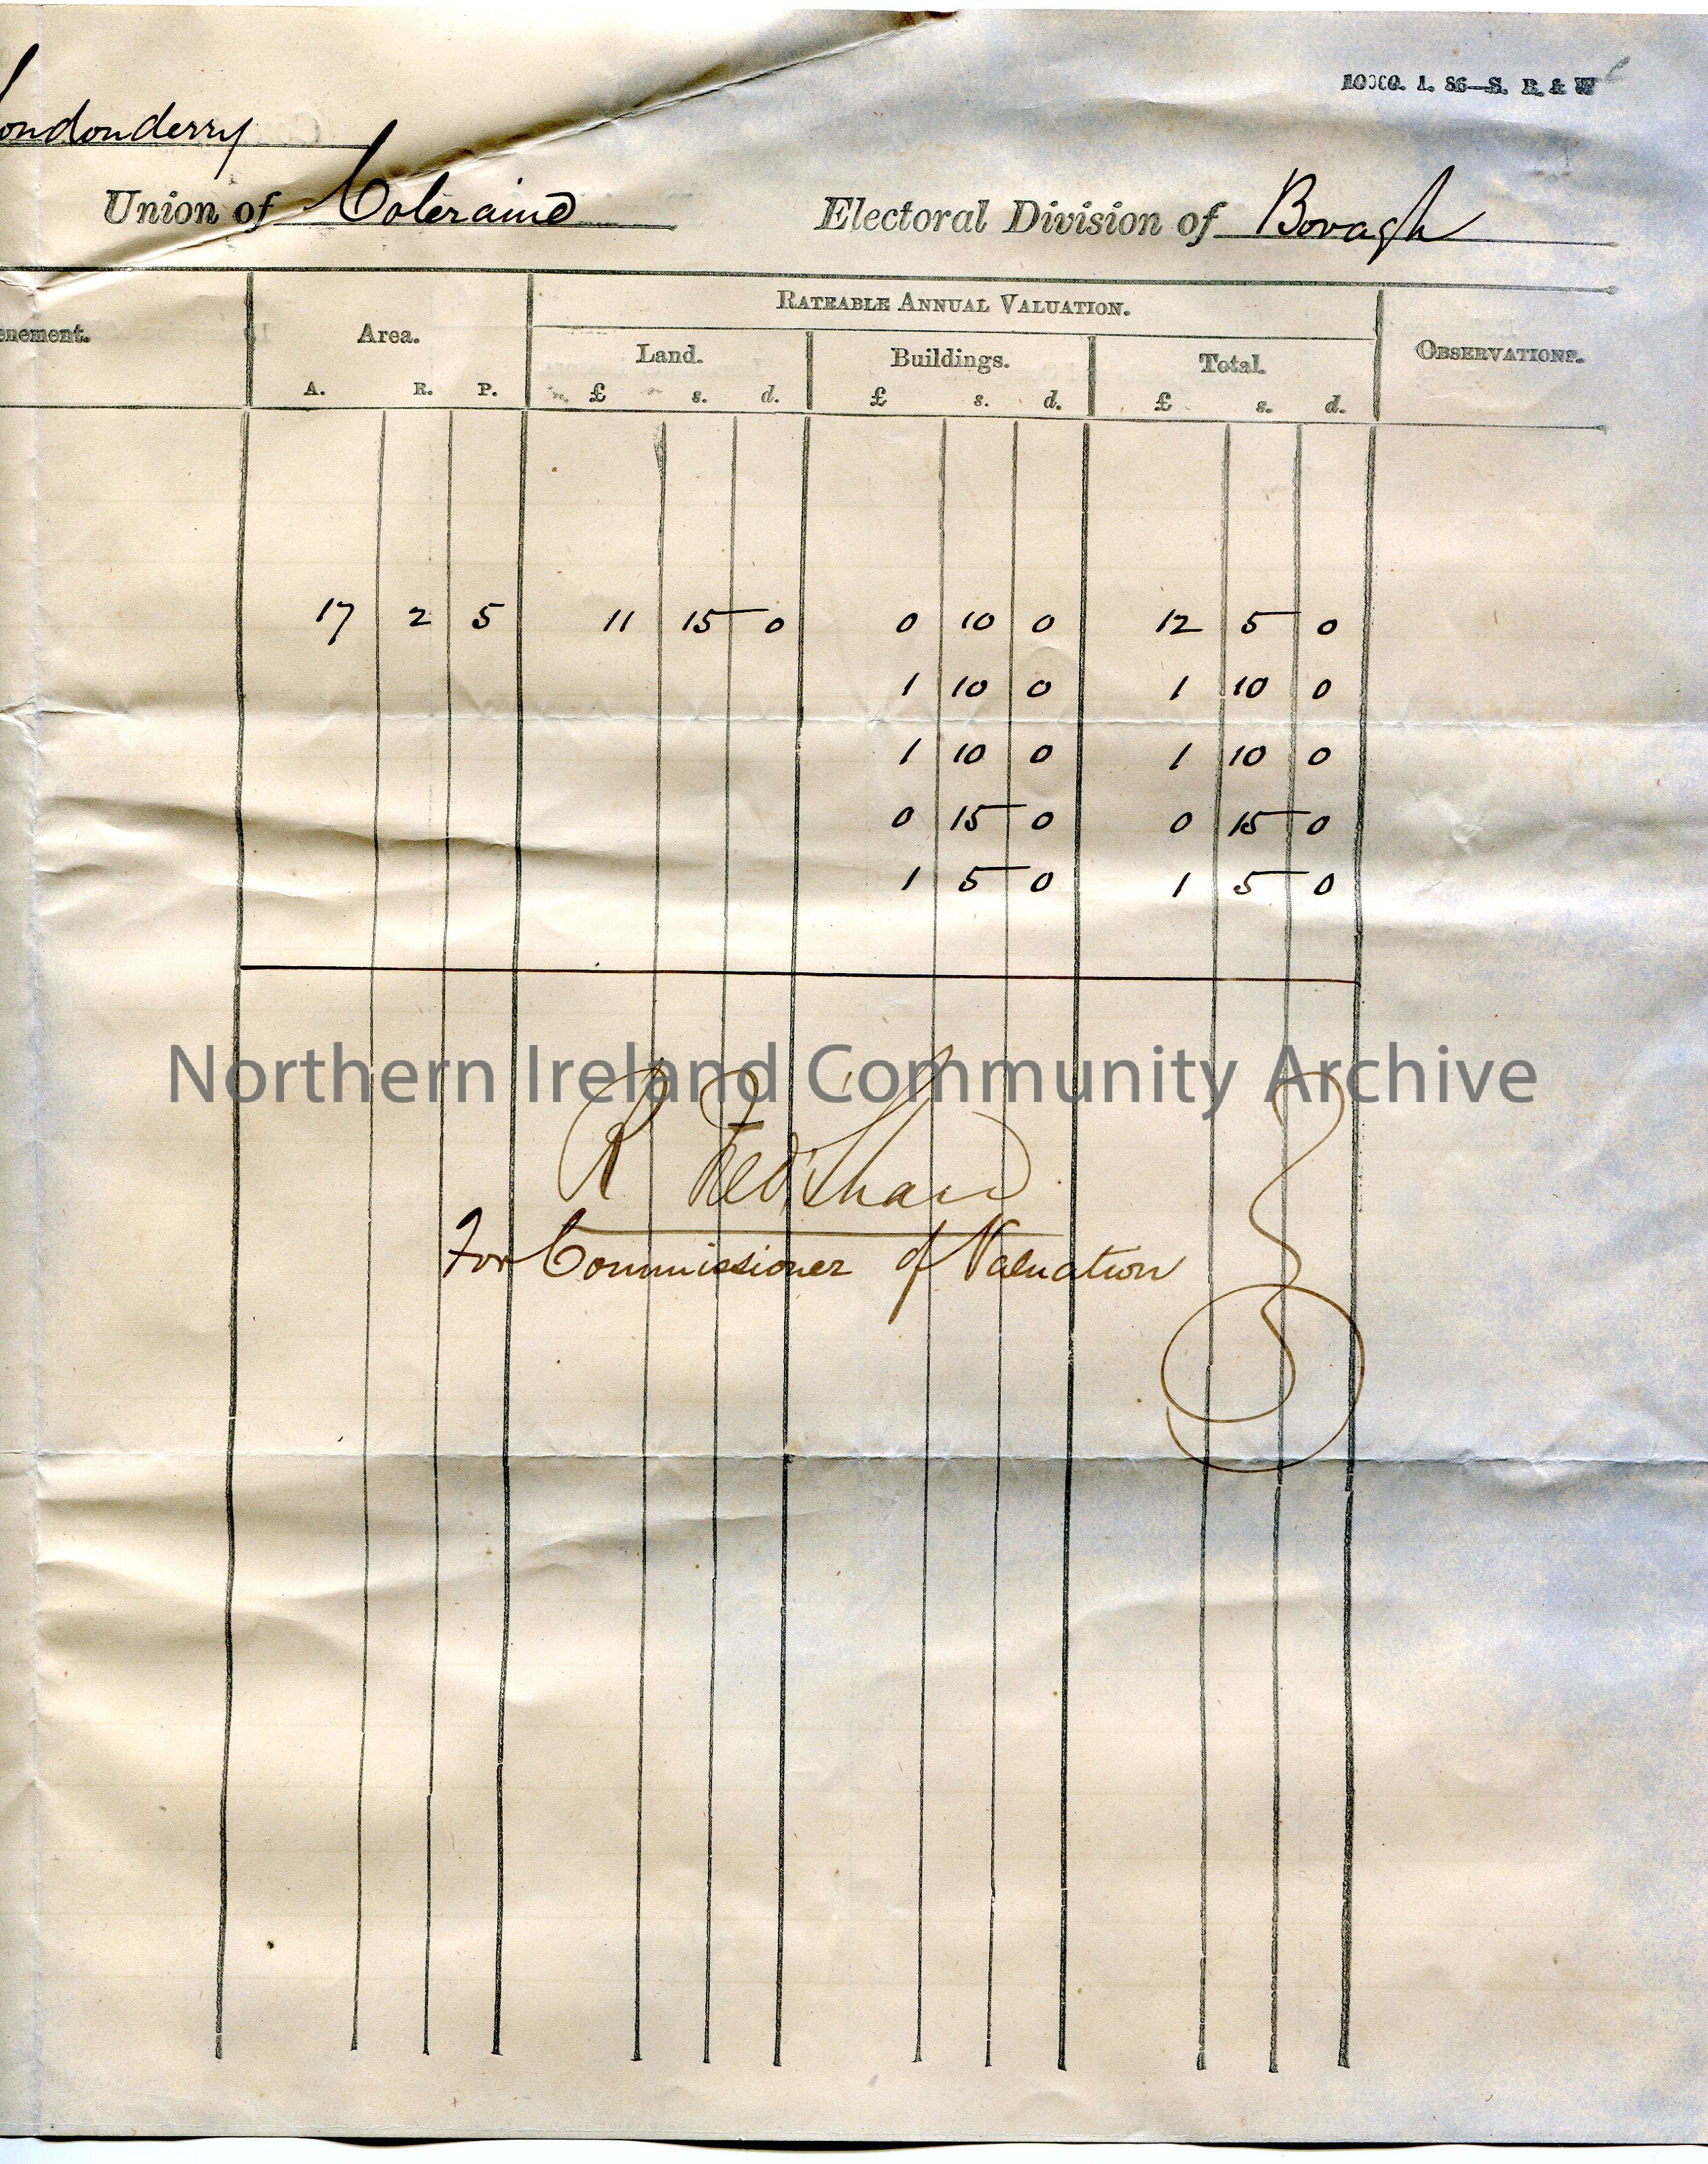 List of tenements and occupiers of County Londonderry, Barony of Coleraine, Parish of Aghadowey, Union of Coleraine and Electoral Division of Bovagh. … – scan029b